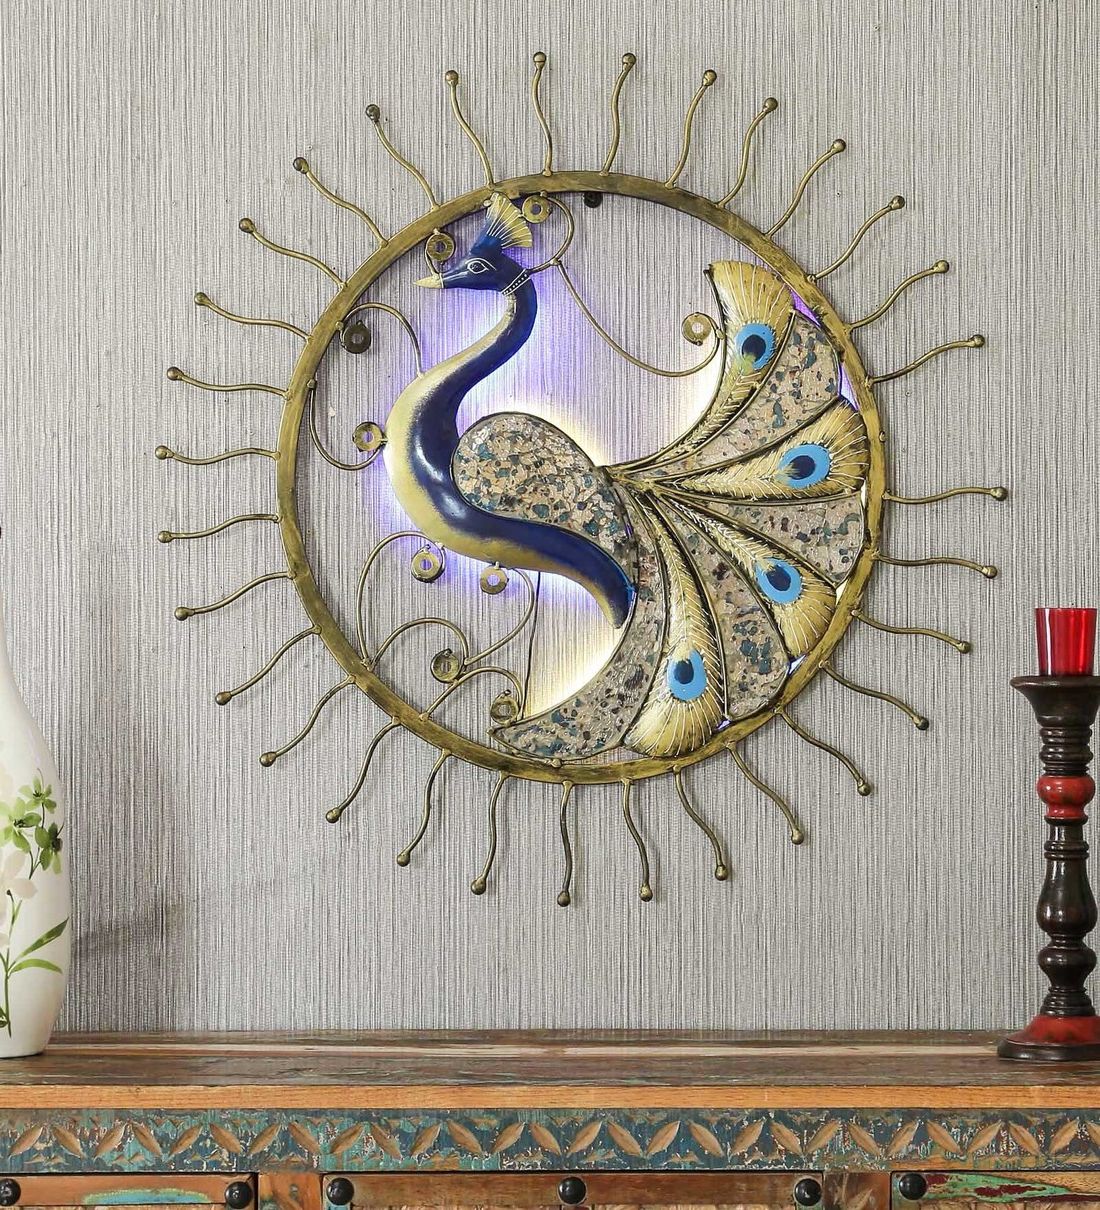 Buy Blue Metal Round Mosaic Peacock Wall Artdecocraft Online Intended For Well Known Round Metal Wall Art (View 11 of 15)